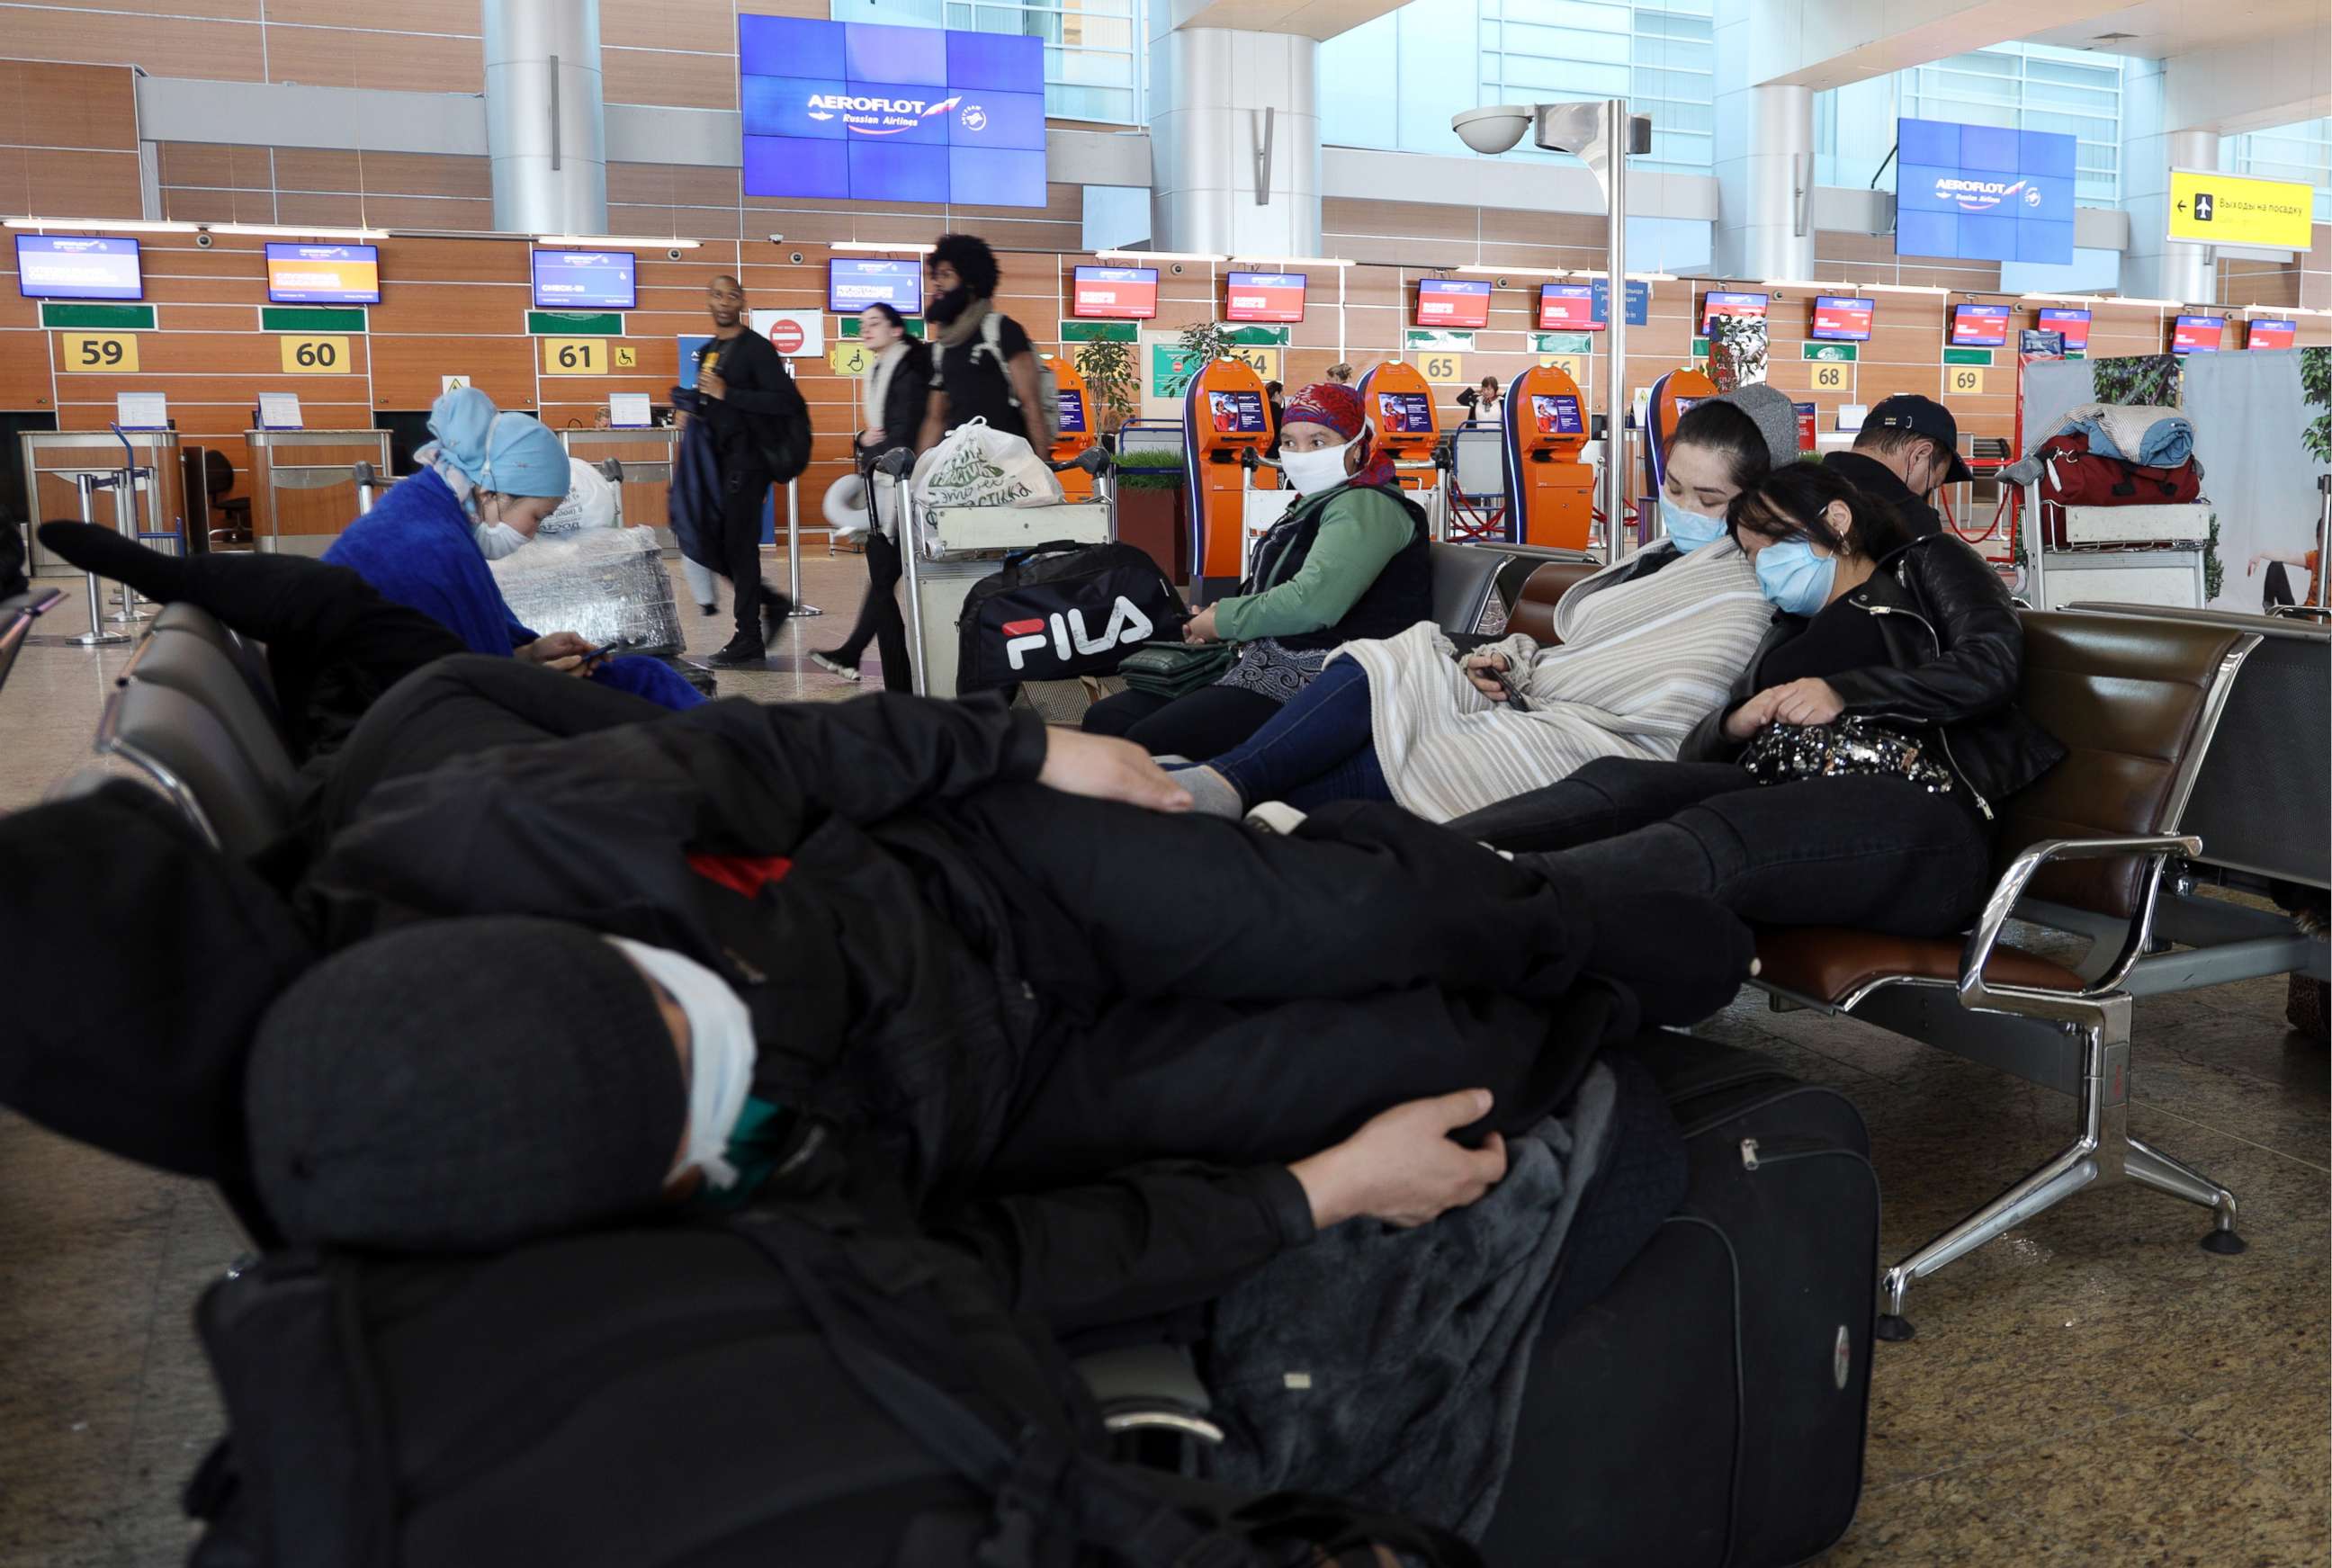 PHOTO: Passengers at Sheremetyevo International Airport sit on the first day of an international flight ban ordered by the government amid the ongoing COVID-19 pandemic and effective since March 27.